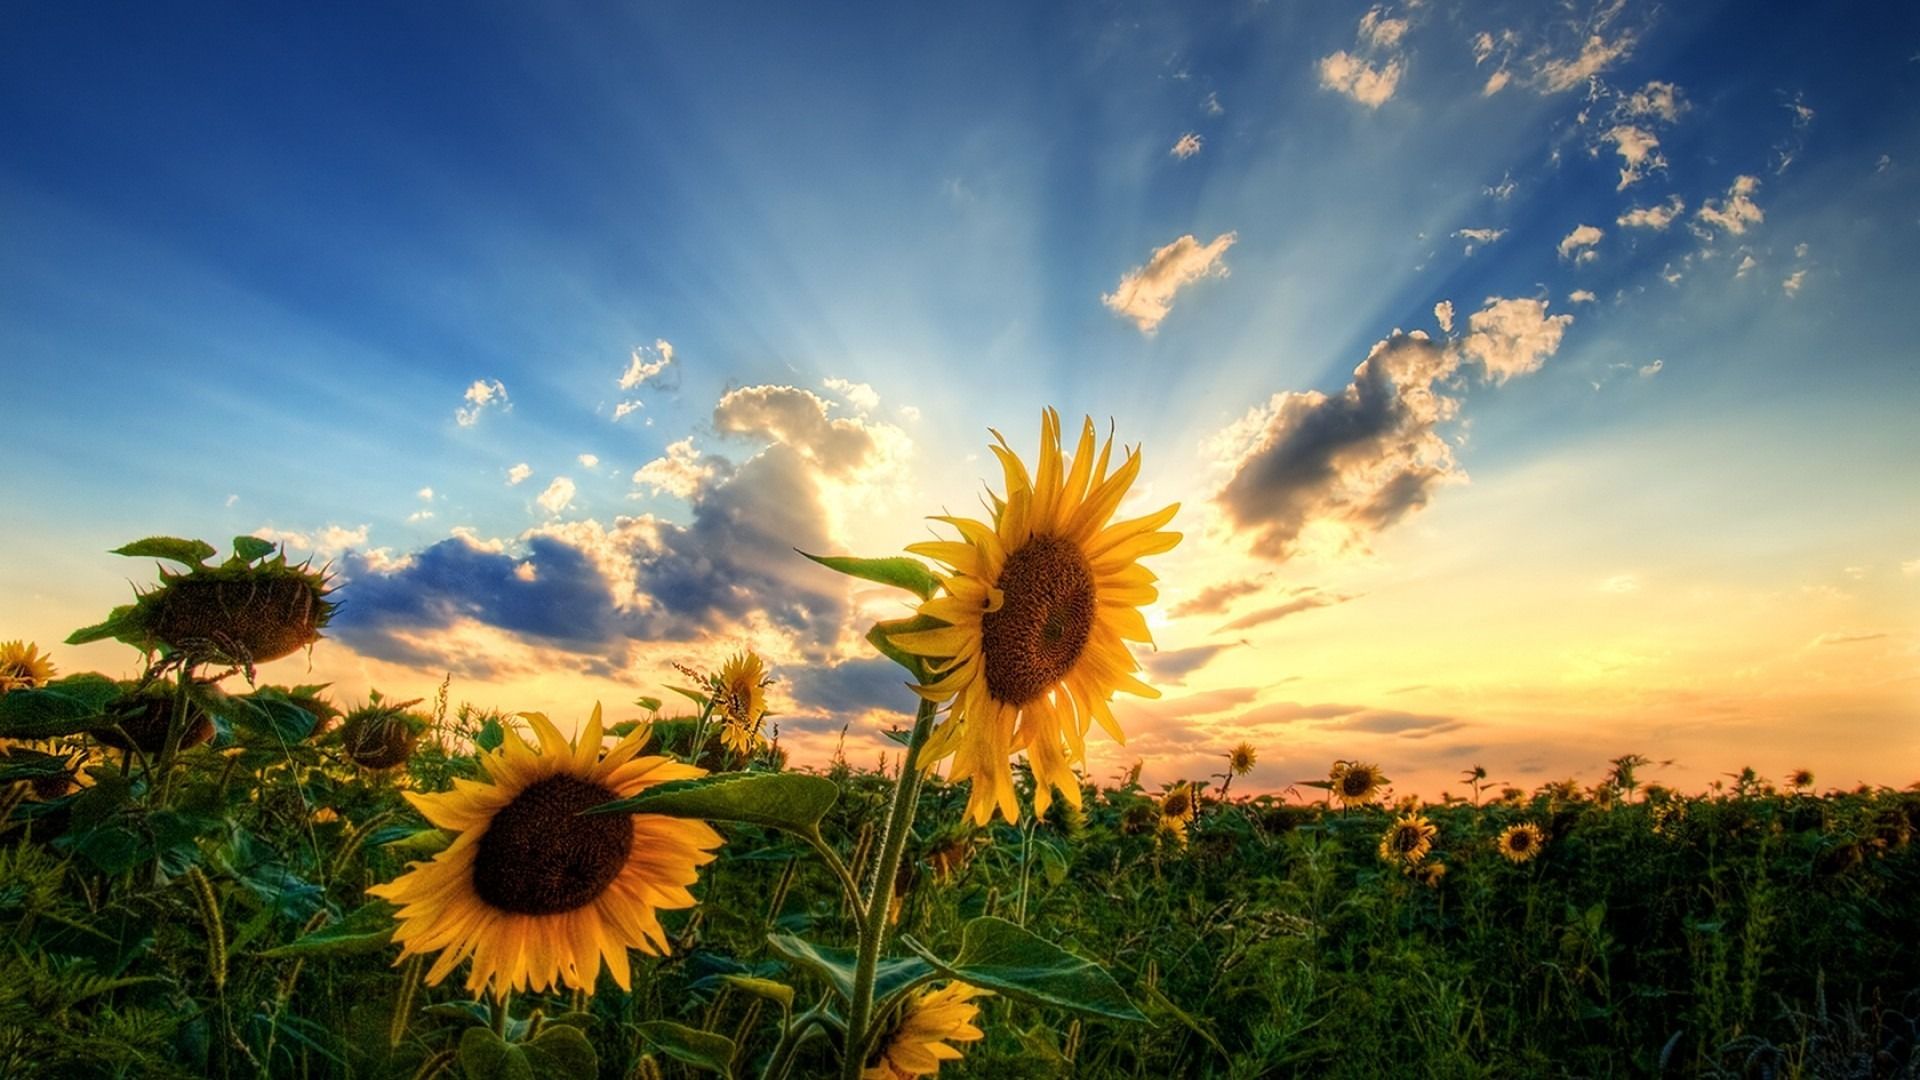 Top Sunflower HQ Picture, Sunflower WD 44 Wallpaper